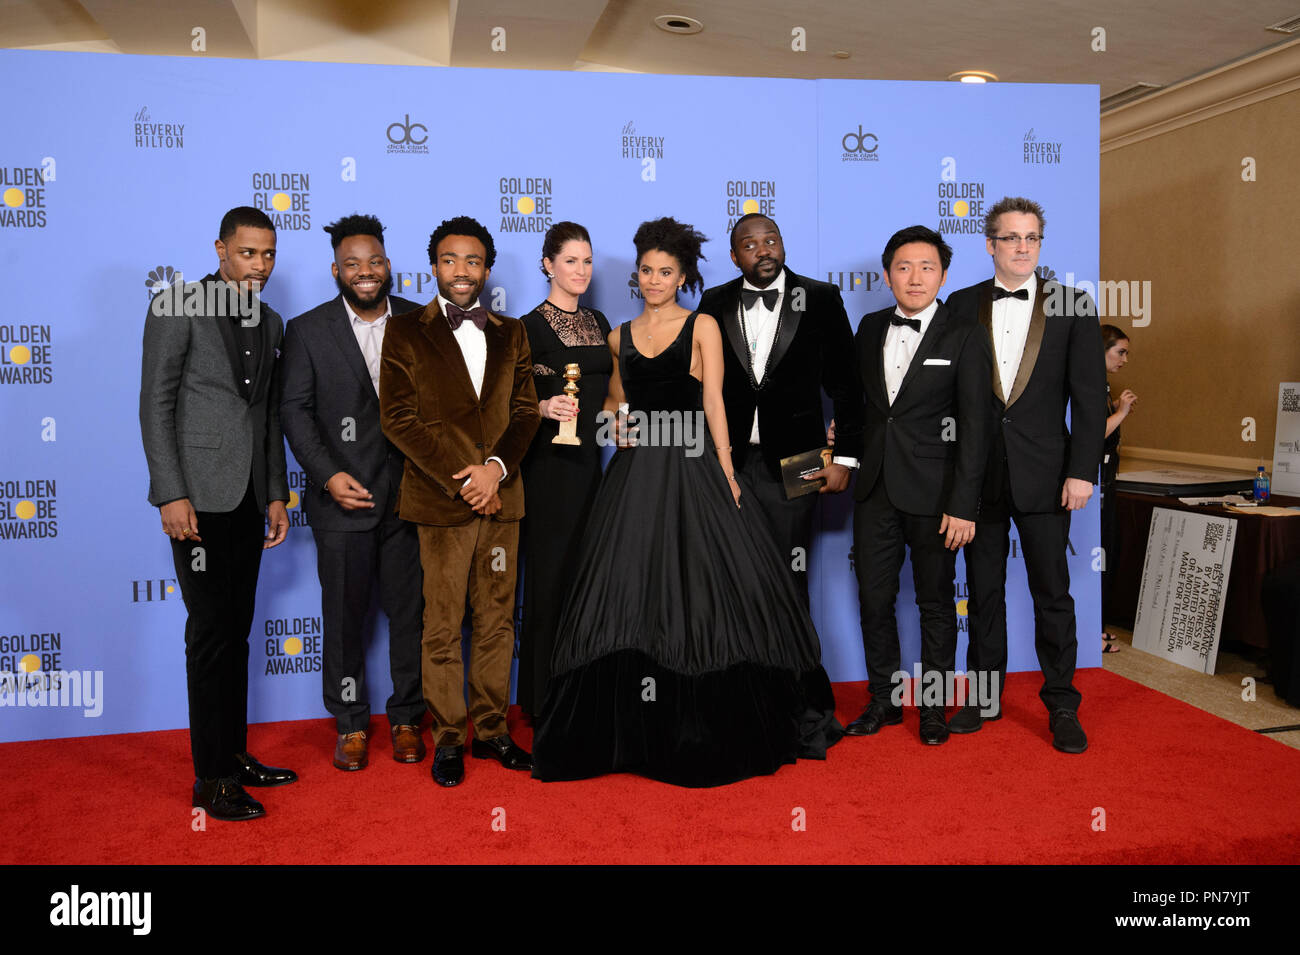 For BEST TELEVISION SERIES – COMEDY OR MUSICAL, the Golden Globe is awarded to 'Atlanta' (FX). Keith Stanfield, Donald Glover, Zadie Beetz, and Brian Tyree Henry with cast and crew pose with the award backstage in the press room at the 74th Annual Golden Globe Awards at the Beverly Hilton in Beverly Hills, CA on Sunday, January 8, 2017.  File Reference # 33198 543JRC  For Editorial Use Only -  All Rights Reserved Stock Photo